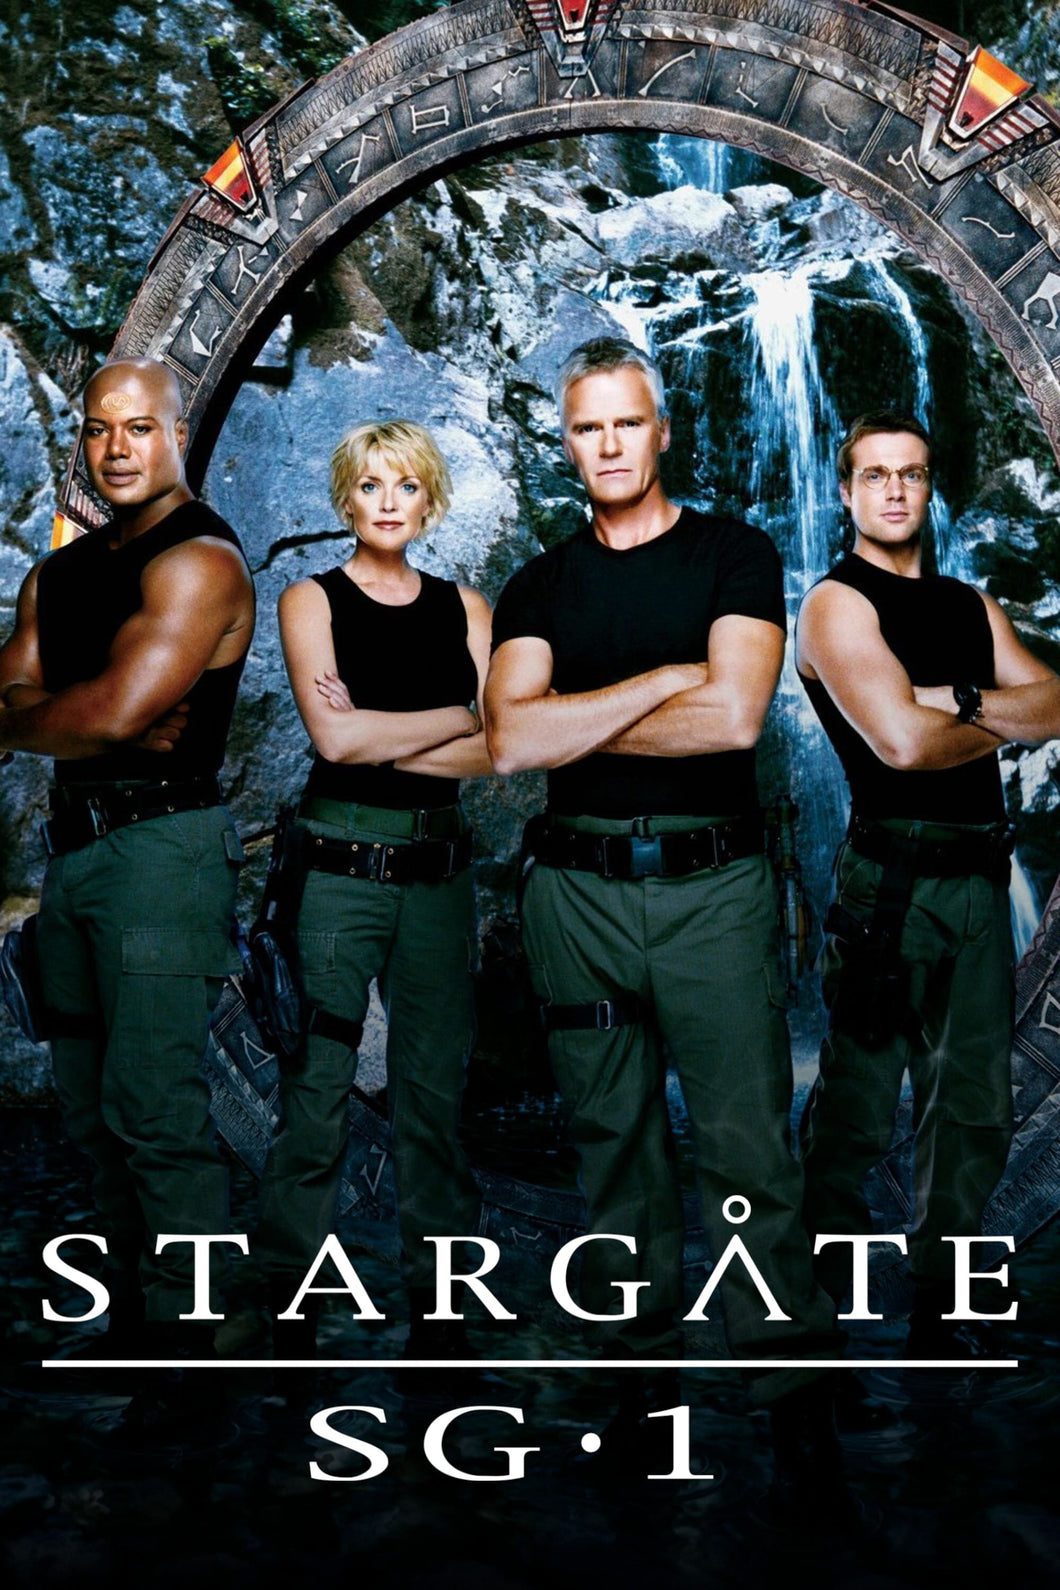 Stargate SG-1 (1997) TV Series High Quality Glossy Paper A1 A2 A3 A4 A3 Framed or Unframed!!!